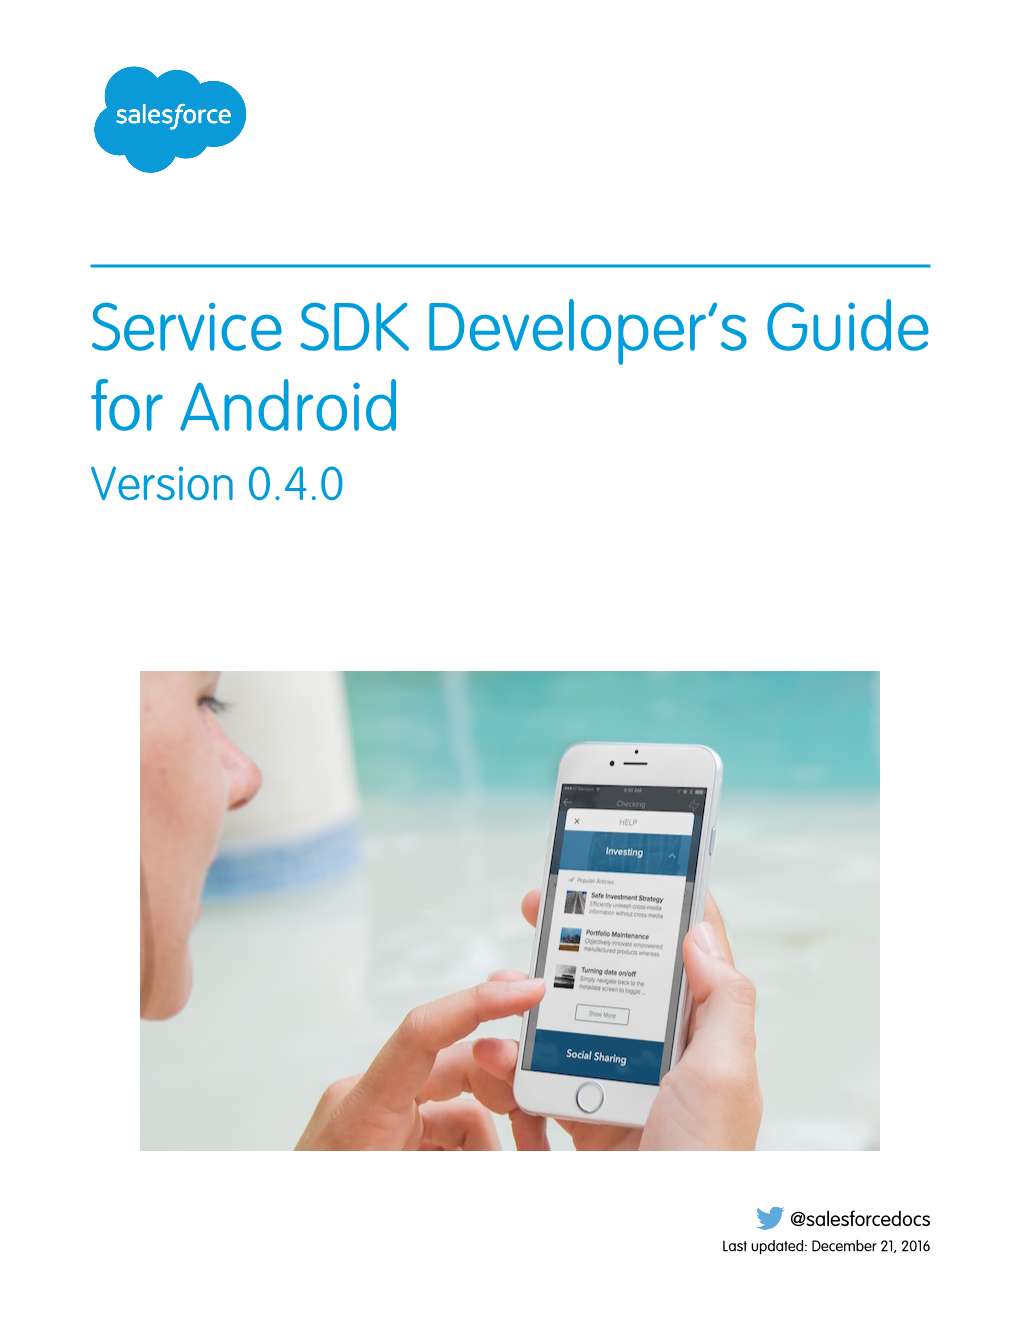 Service SDK Developer's Guide for Android